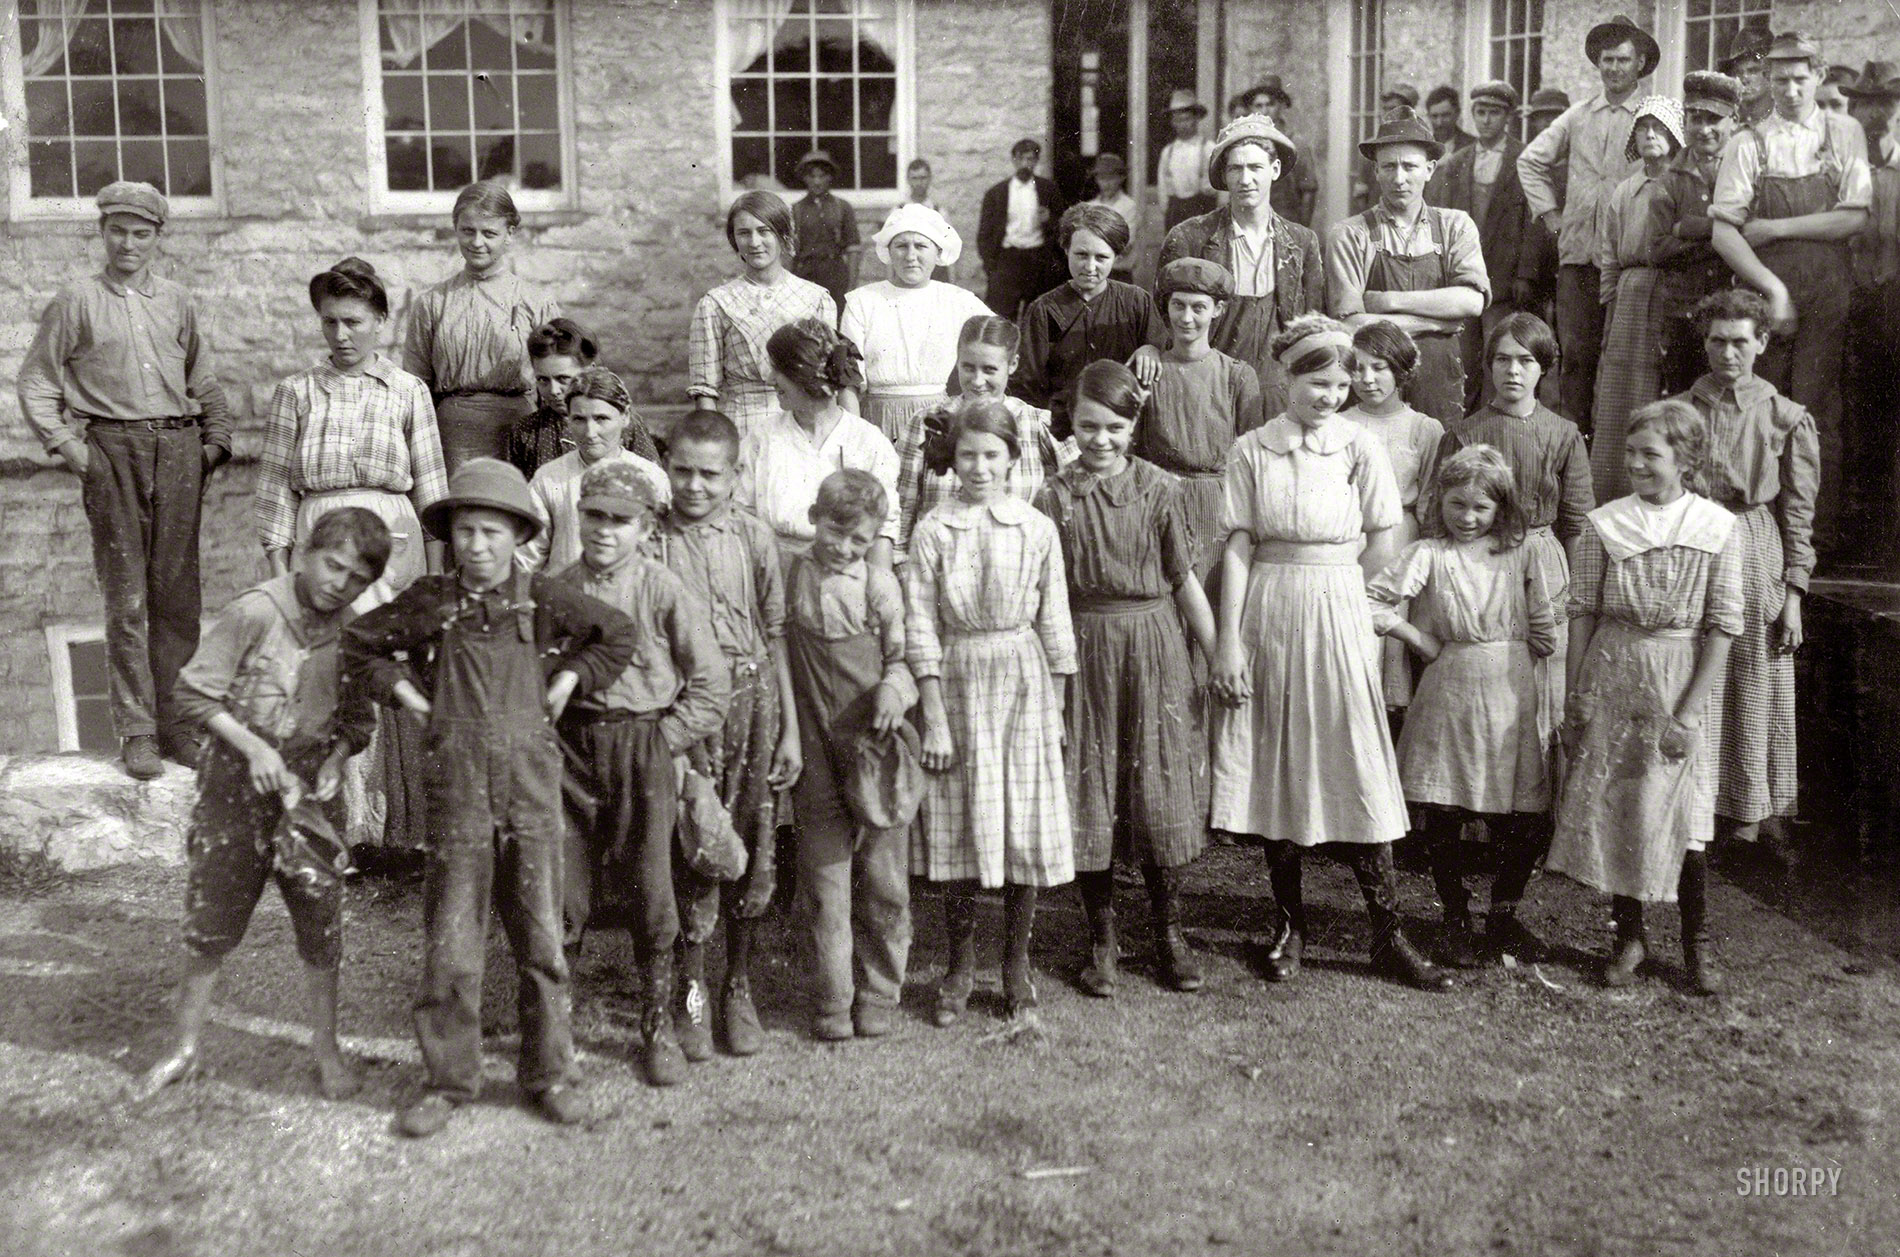 December 1913. "The whole force of workers in the cotton mills of Stevenson, Ala. Several of them are apparently under twelve, but could not get the ages. Photo posed by the general manager." Photo by Lewis Wickes Hine. View full size.